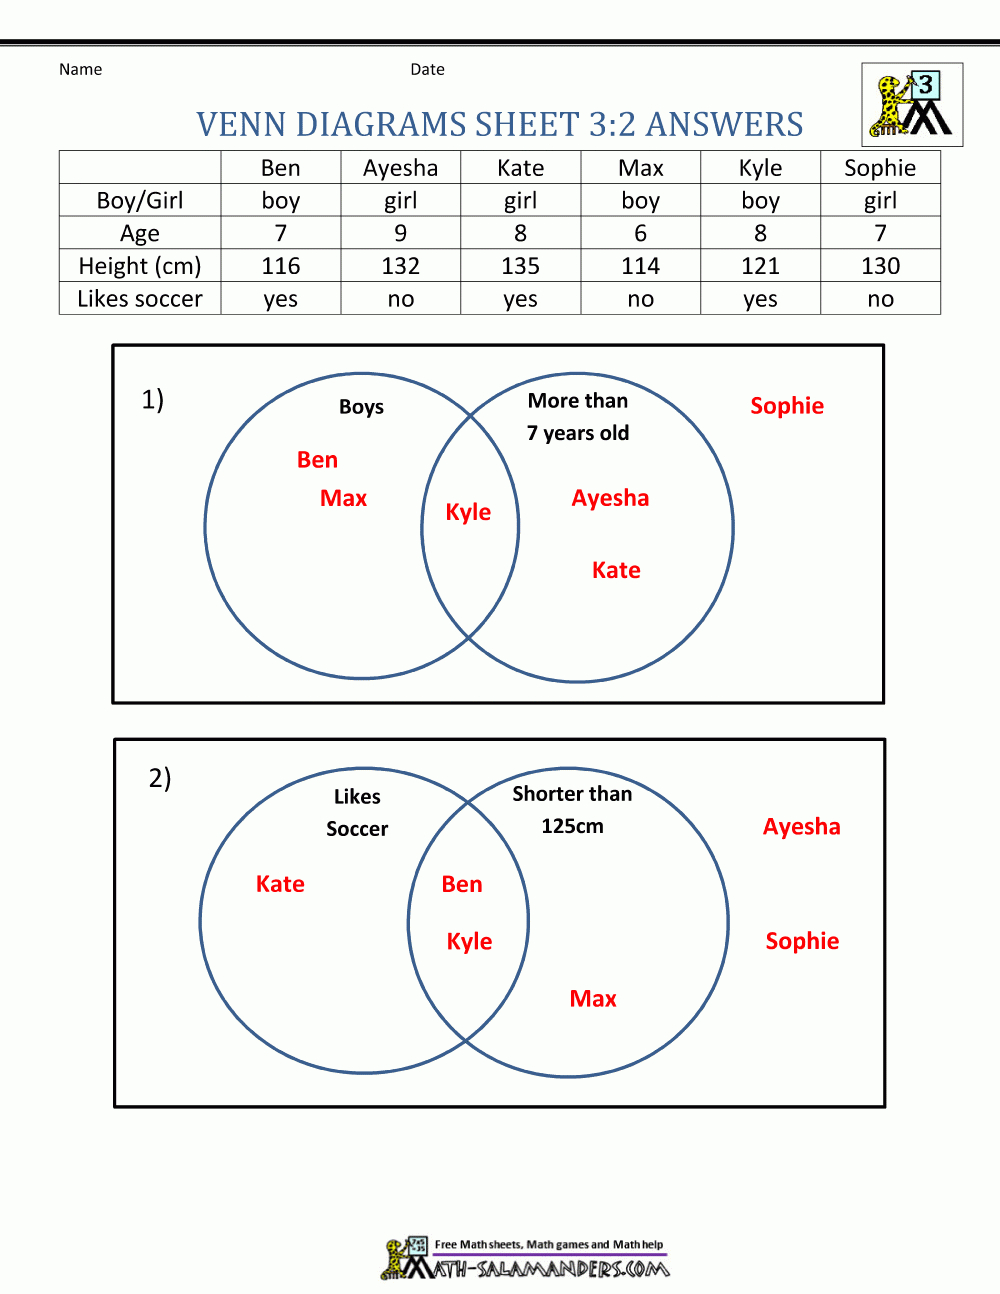 venn-diagrams-worksheets-with-answers-db-excel